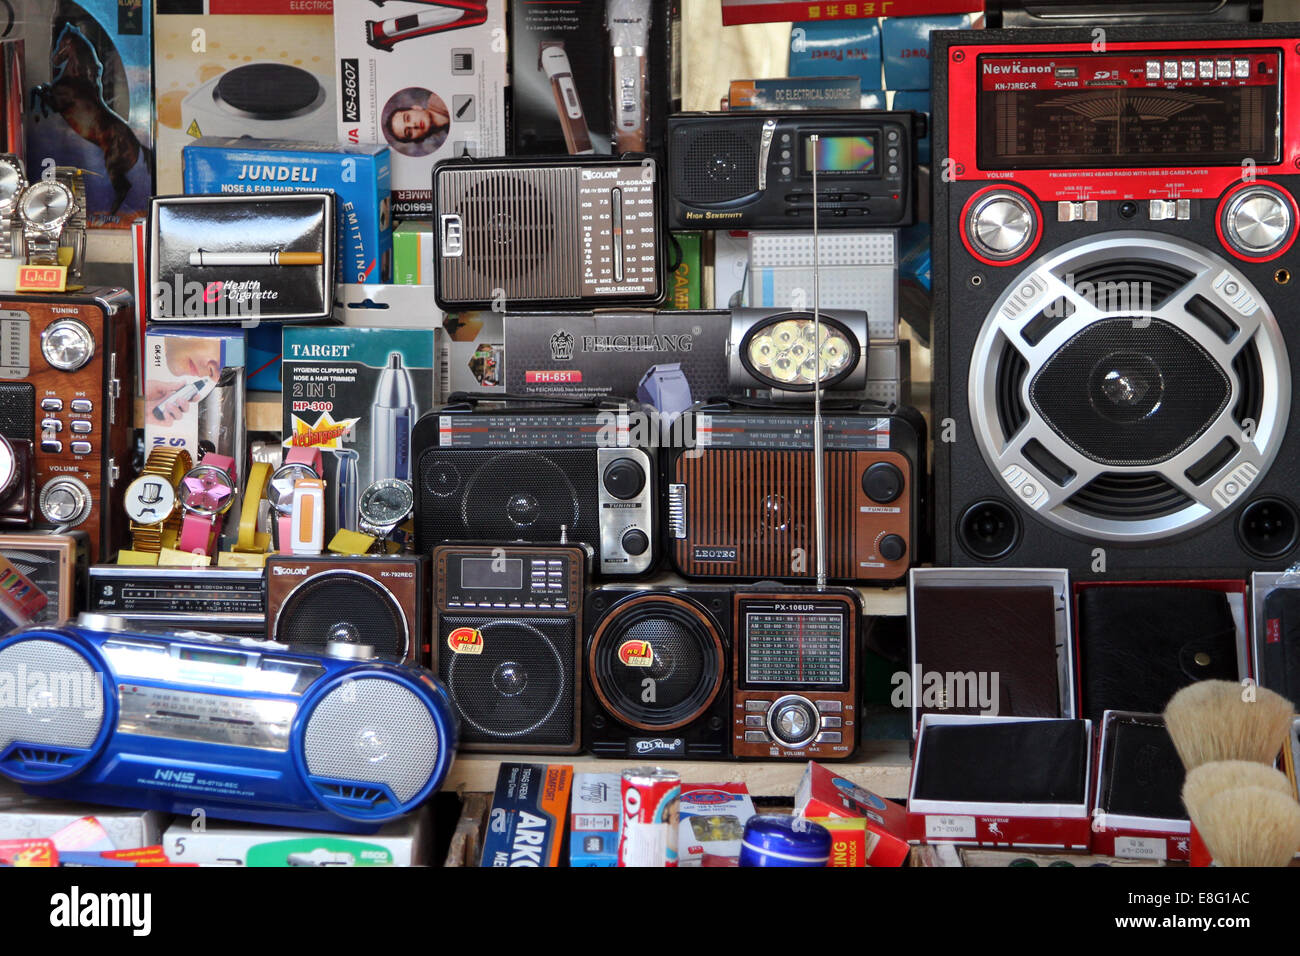 Radios and other personal electronic goods on sale at the City Market in Bitola, Macedonia Stock Photo